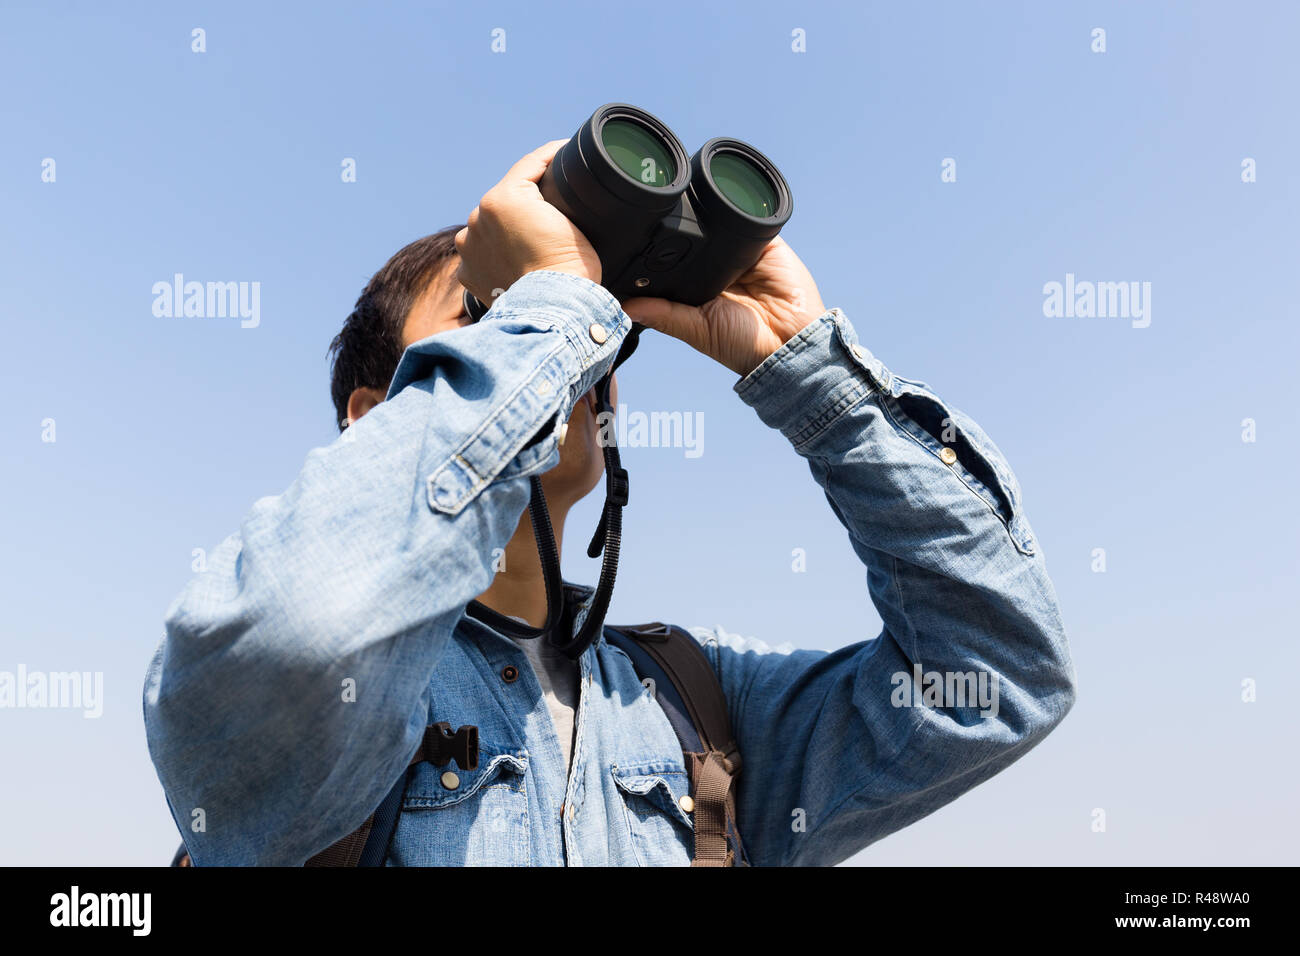 Japanese Guy Playing High Resolution Stock Photography and Images - Alamy